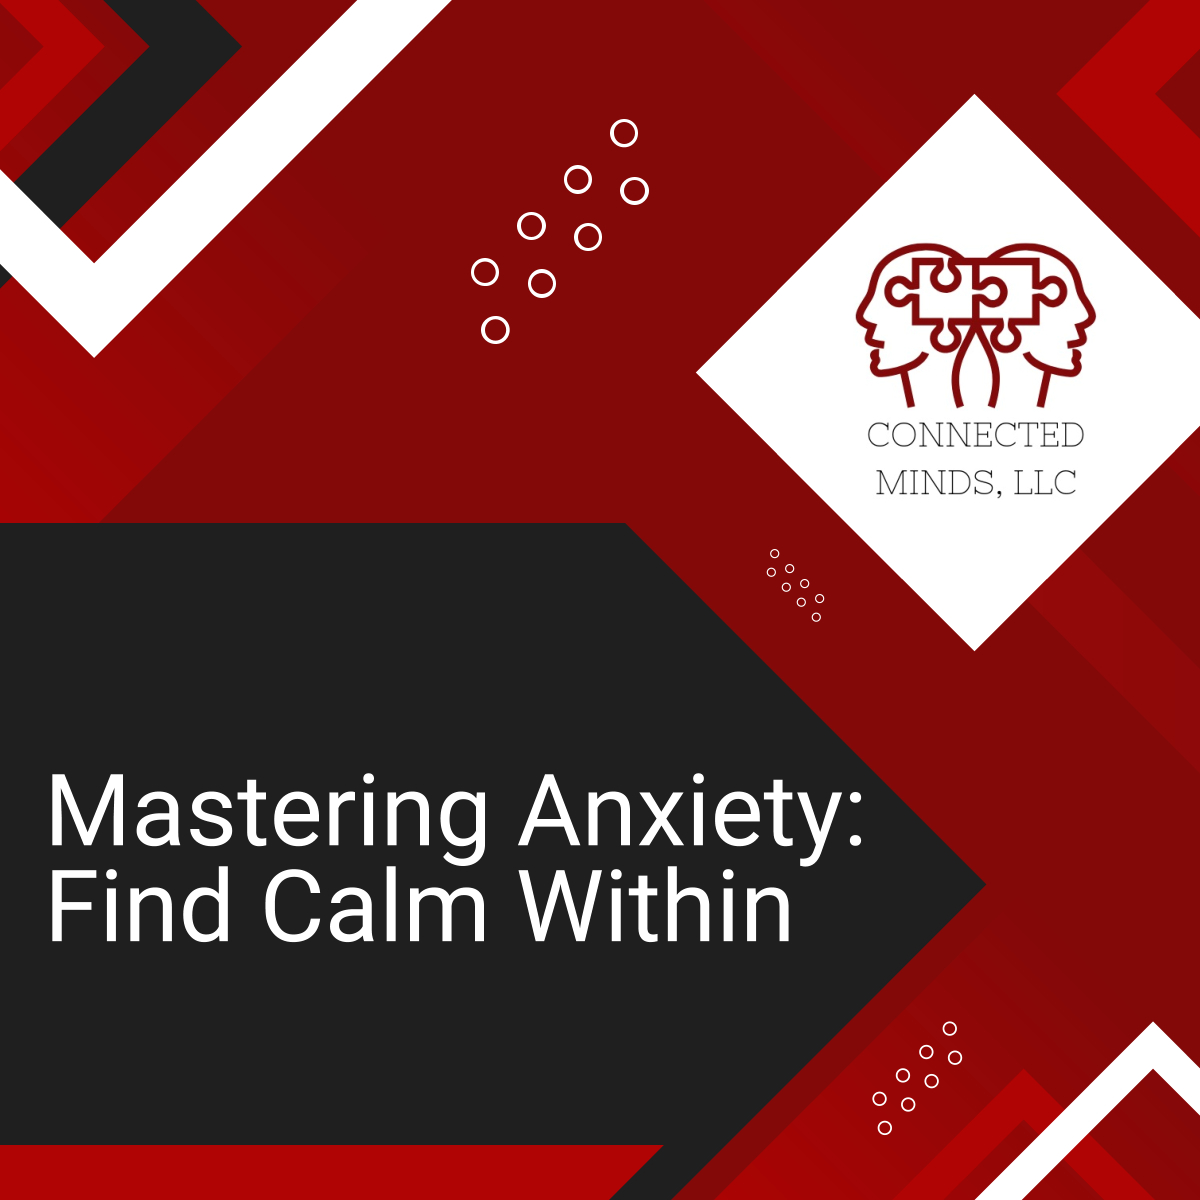 Anxiety can often feel suffocating and ever-present. However, with the right techniques and understanding, you can navigate life's challenging moments. Visit us at connectedmindsllc.com today!

#PsychiatricWellness #MasteringAnxiety #RightTechniques